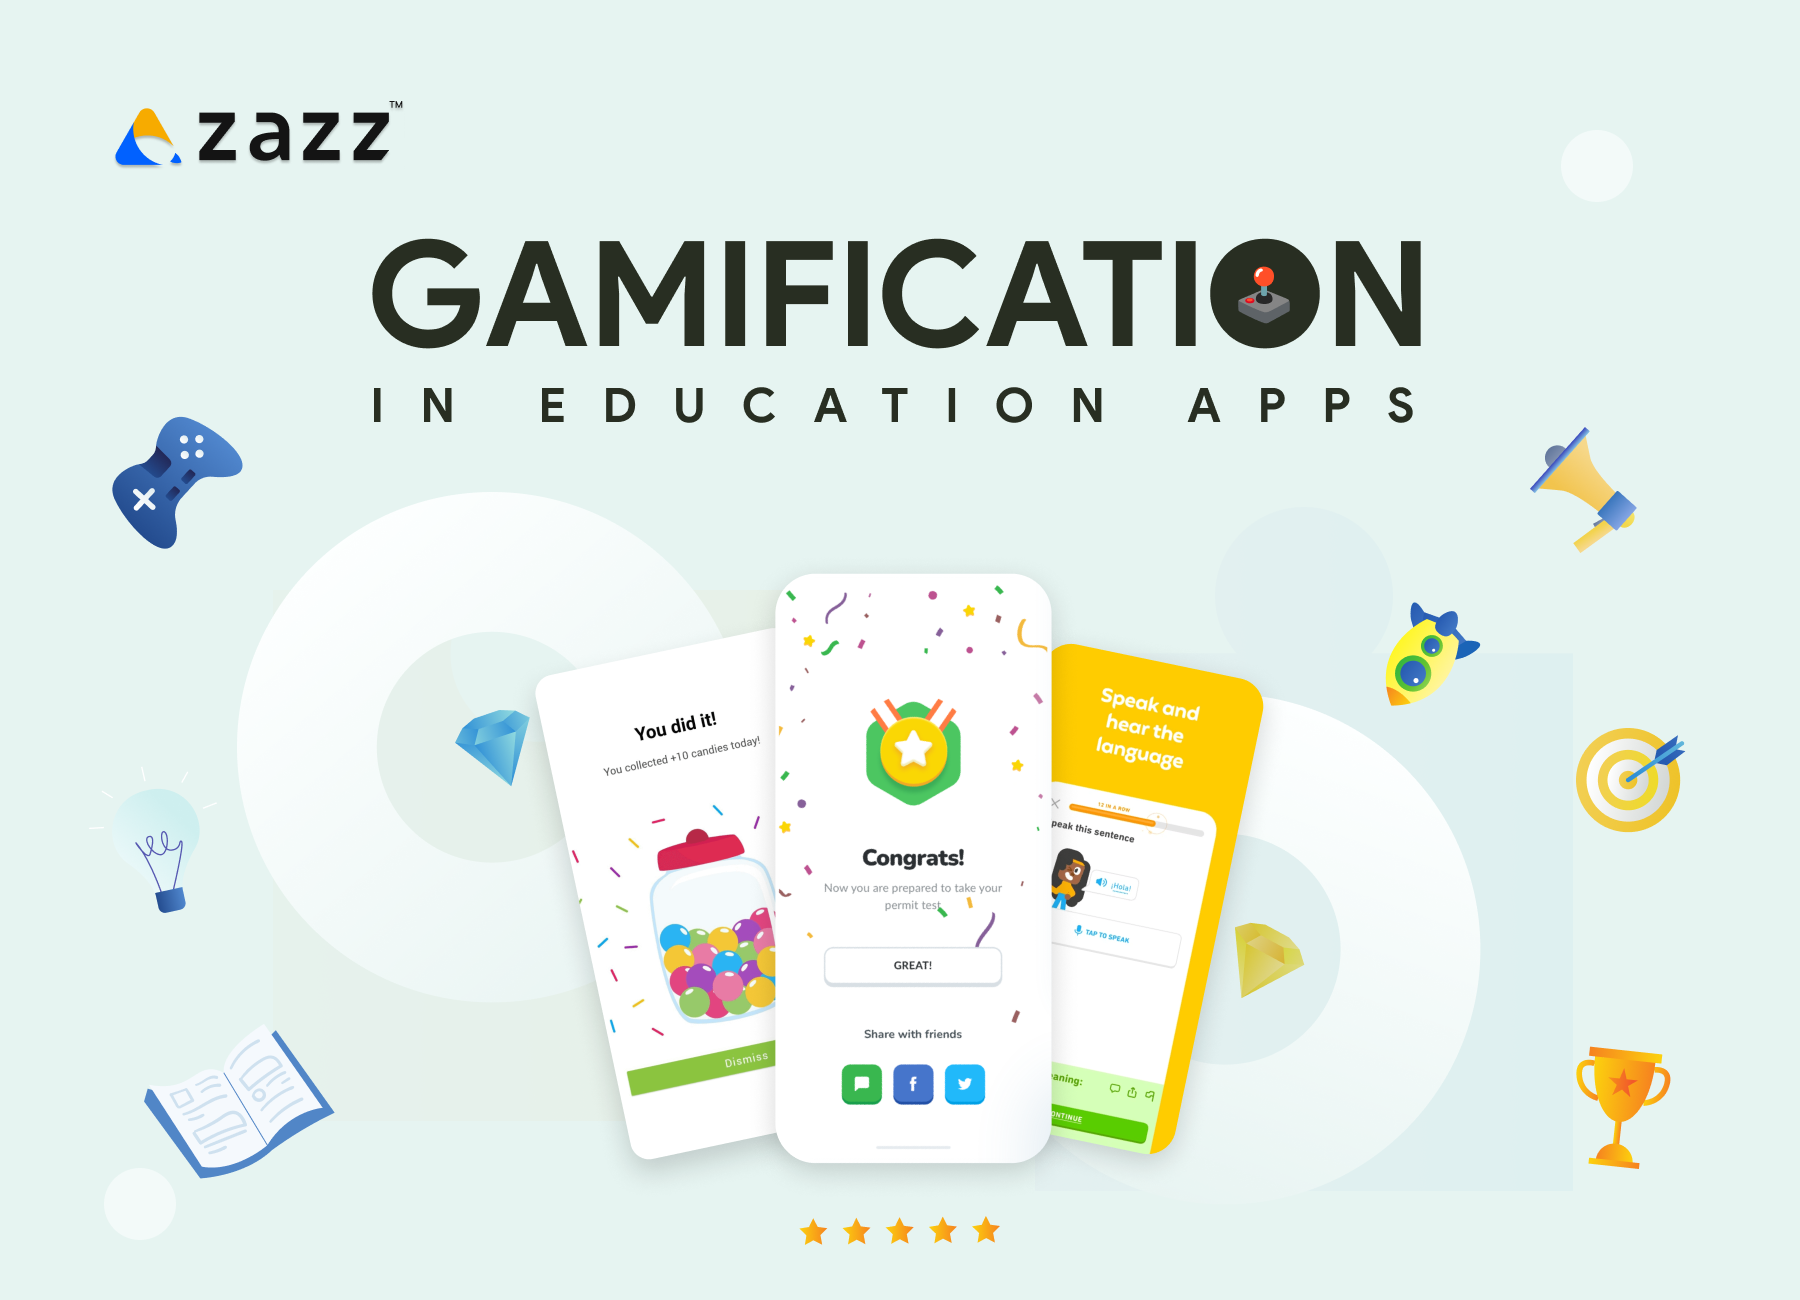 Gamification can transform educational apps & invite more engagement 